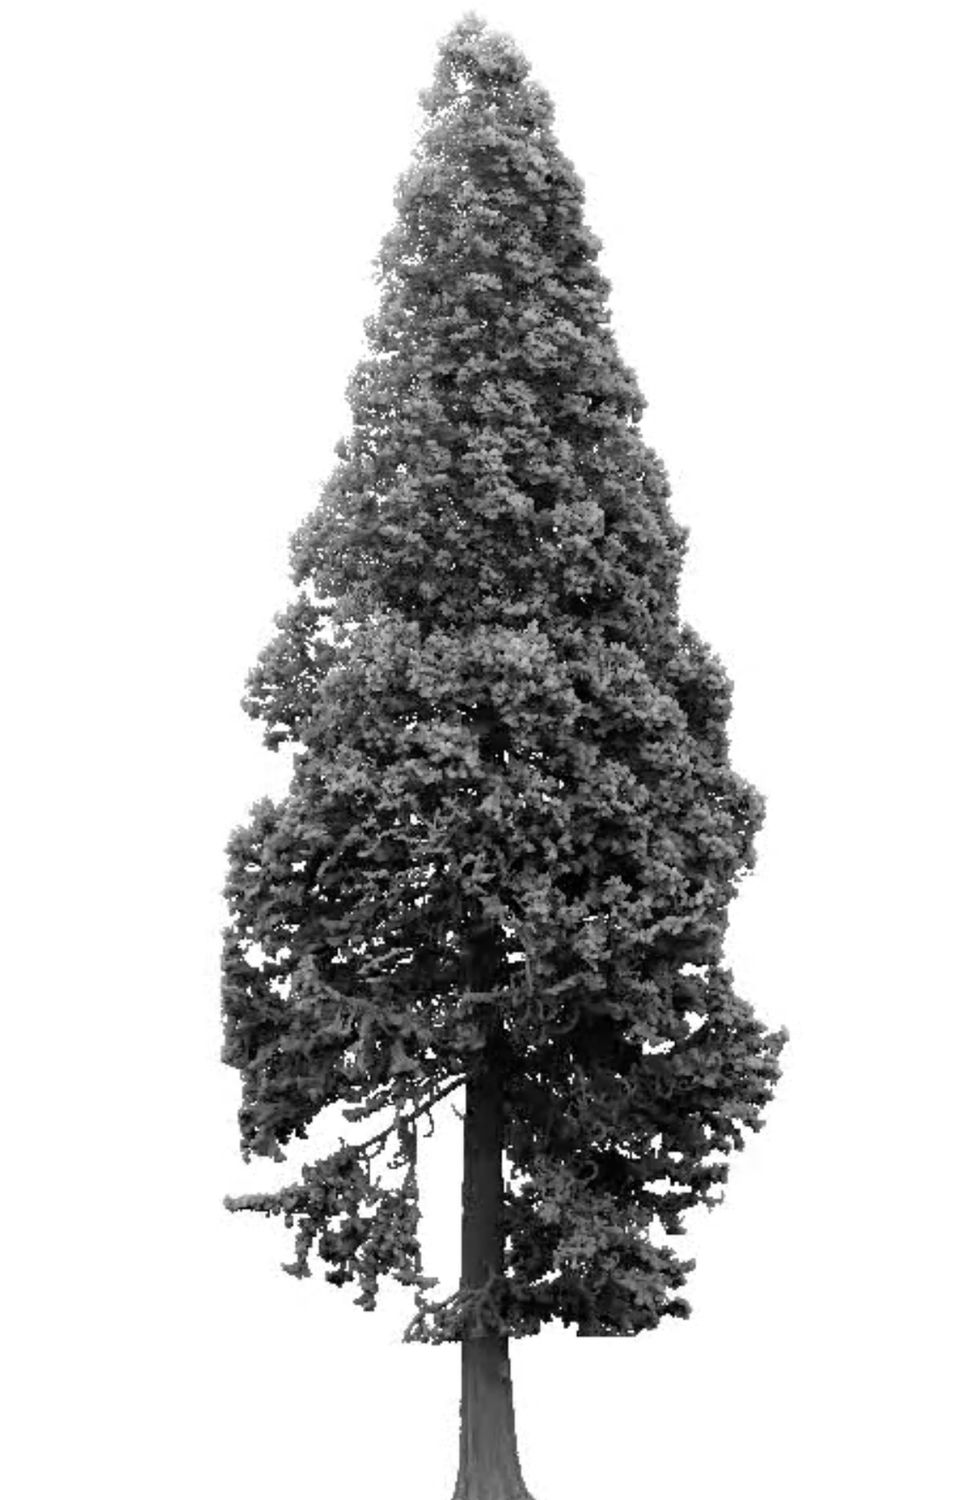 Scan of giant redwood